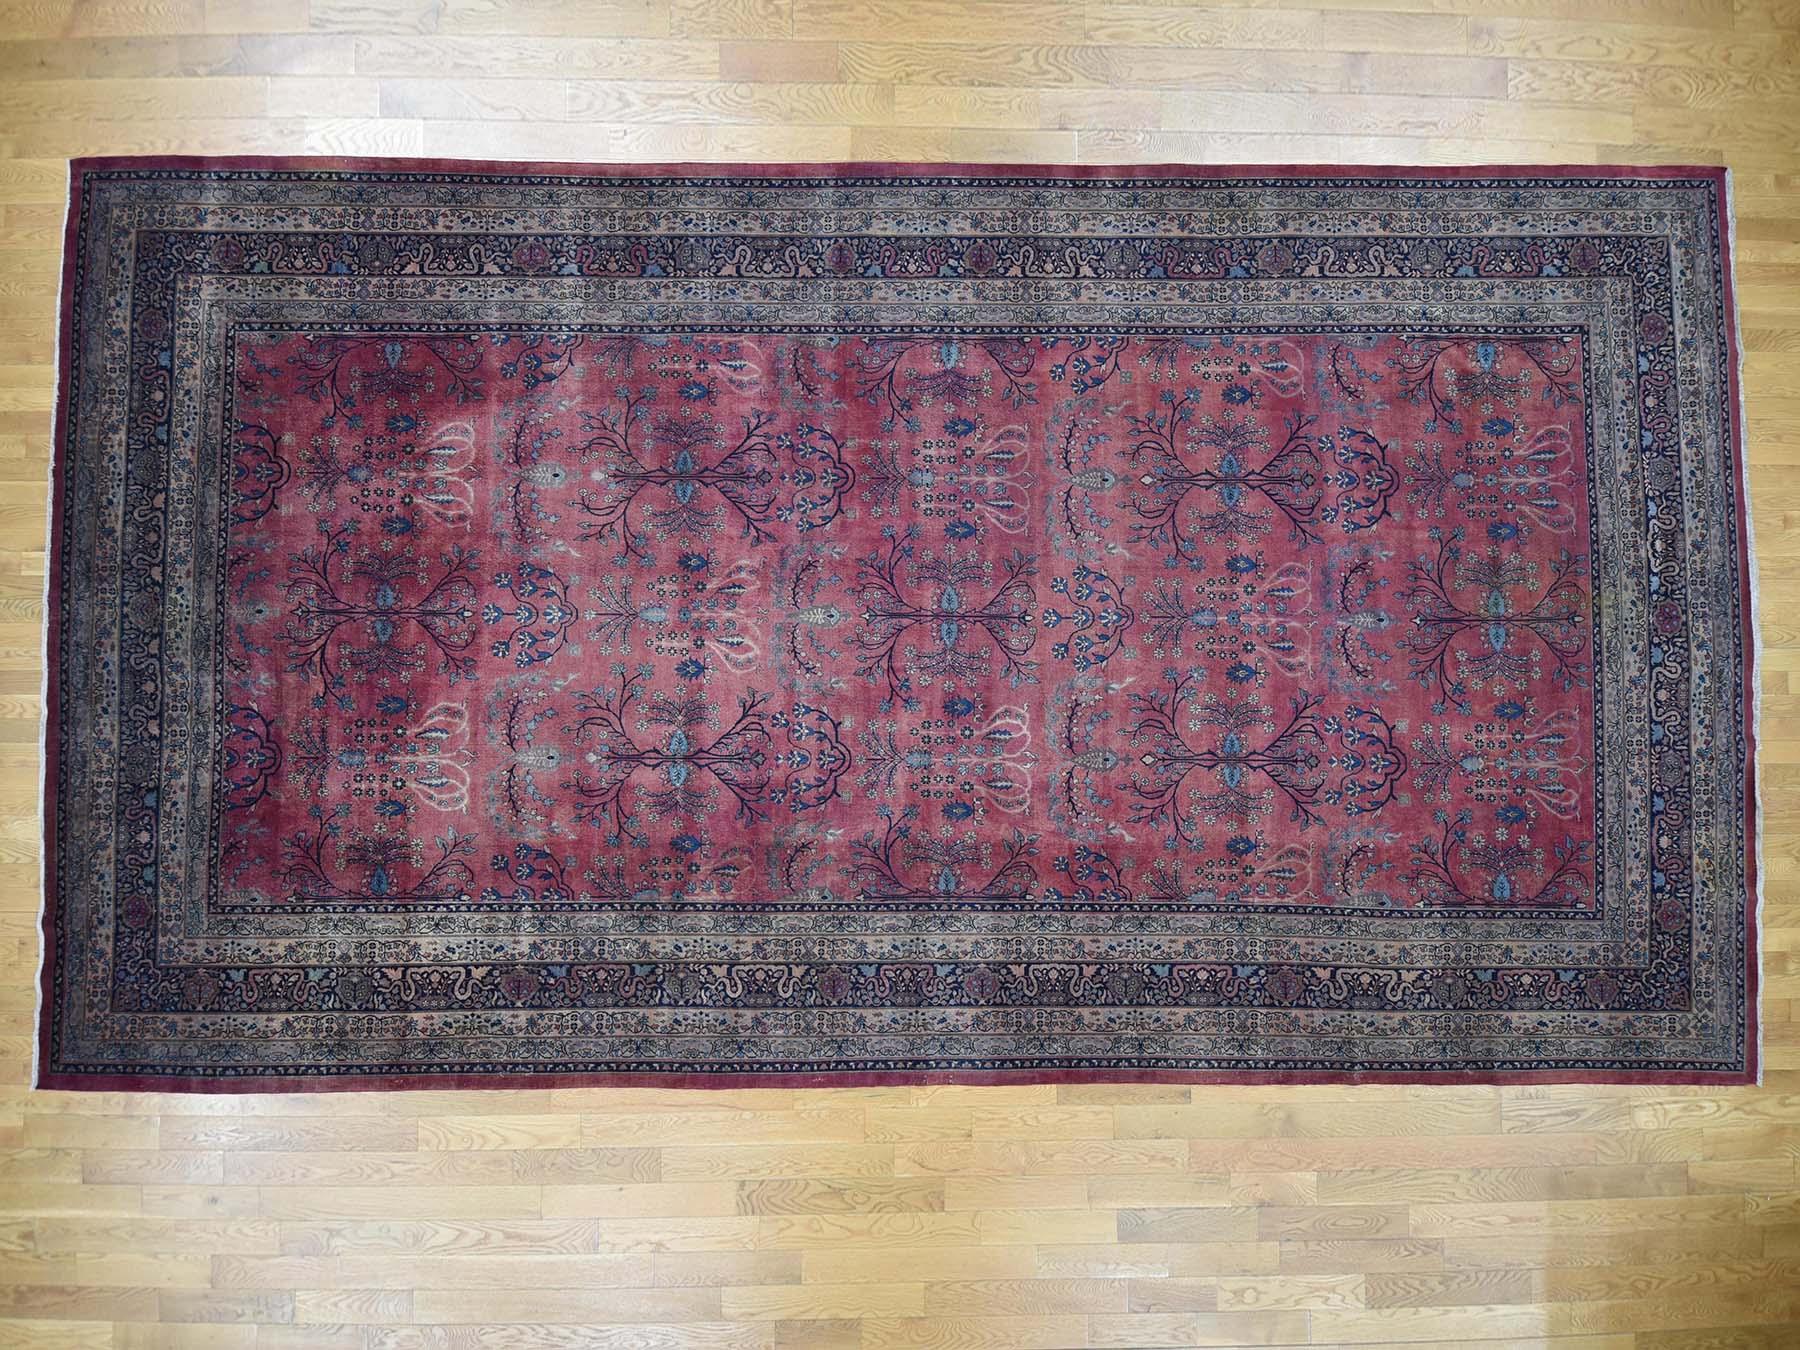 This is a Genuine hand knotted oriental rug. It is not hand tufted or machine made rug. Our entire inventory is made of either hand knotted or handwoven rugs.

Remake your home with this amazing antique carpet. This handcrafted Persian Kashan, is an